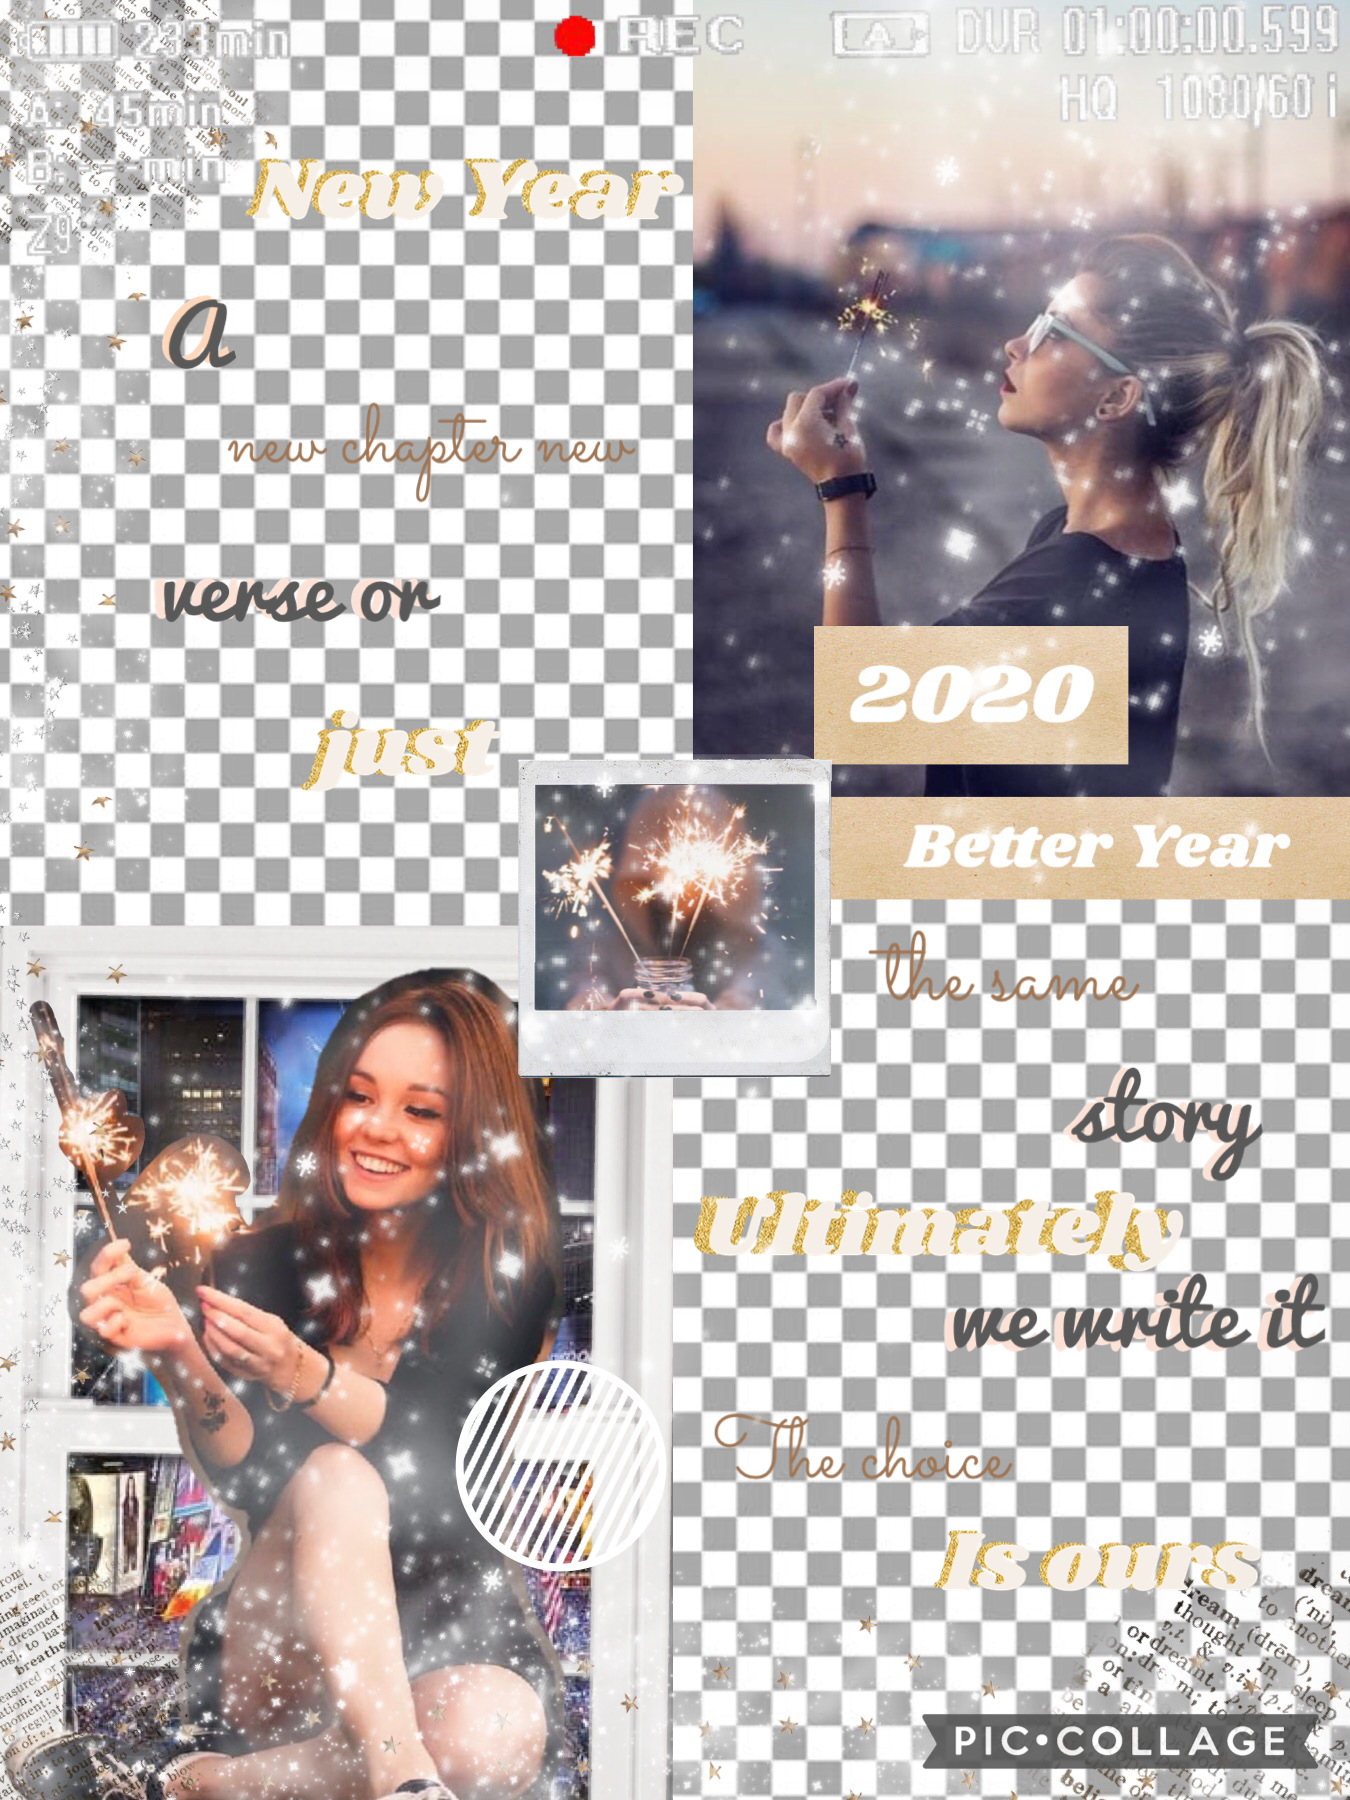 🎆Tap🎆
Happy New Year everyone and thank you all so much for 900 followers on New Years Eve it’s a 2021/2022 miracle! I'm less than 100 away from my goal 1000! Happy New Year and I wish you all a Grand and healthy New Year!!🎉